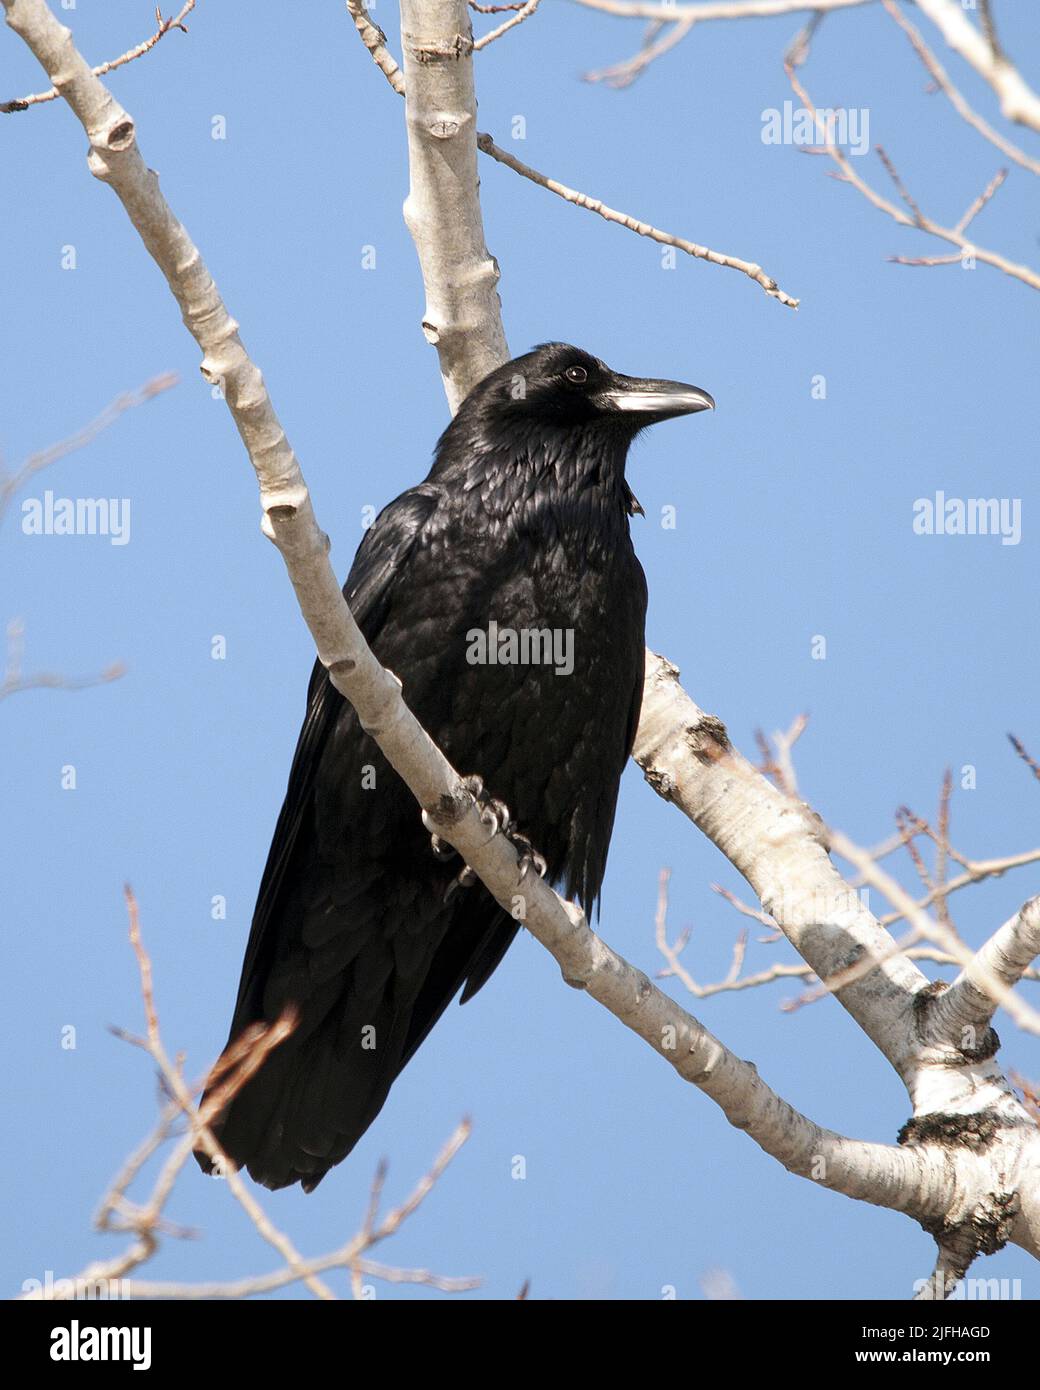 Raven perched on tree branch displaying black feather plumage, tail, beak, eye with a blur background in its habitat surrounding with a blue sky back. Stock Photo